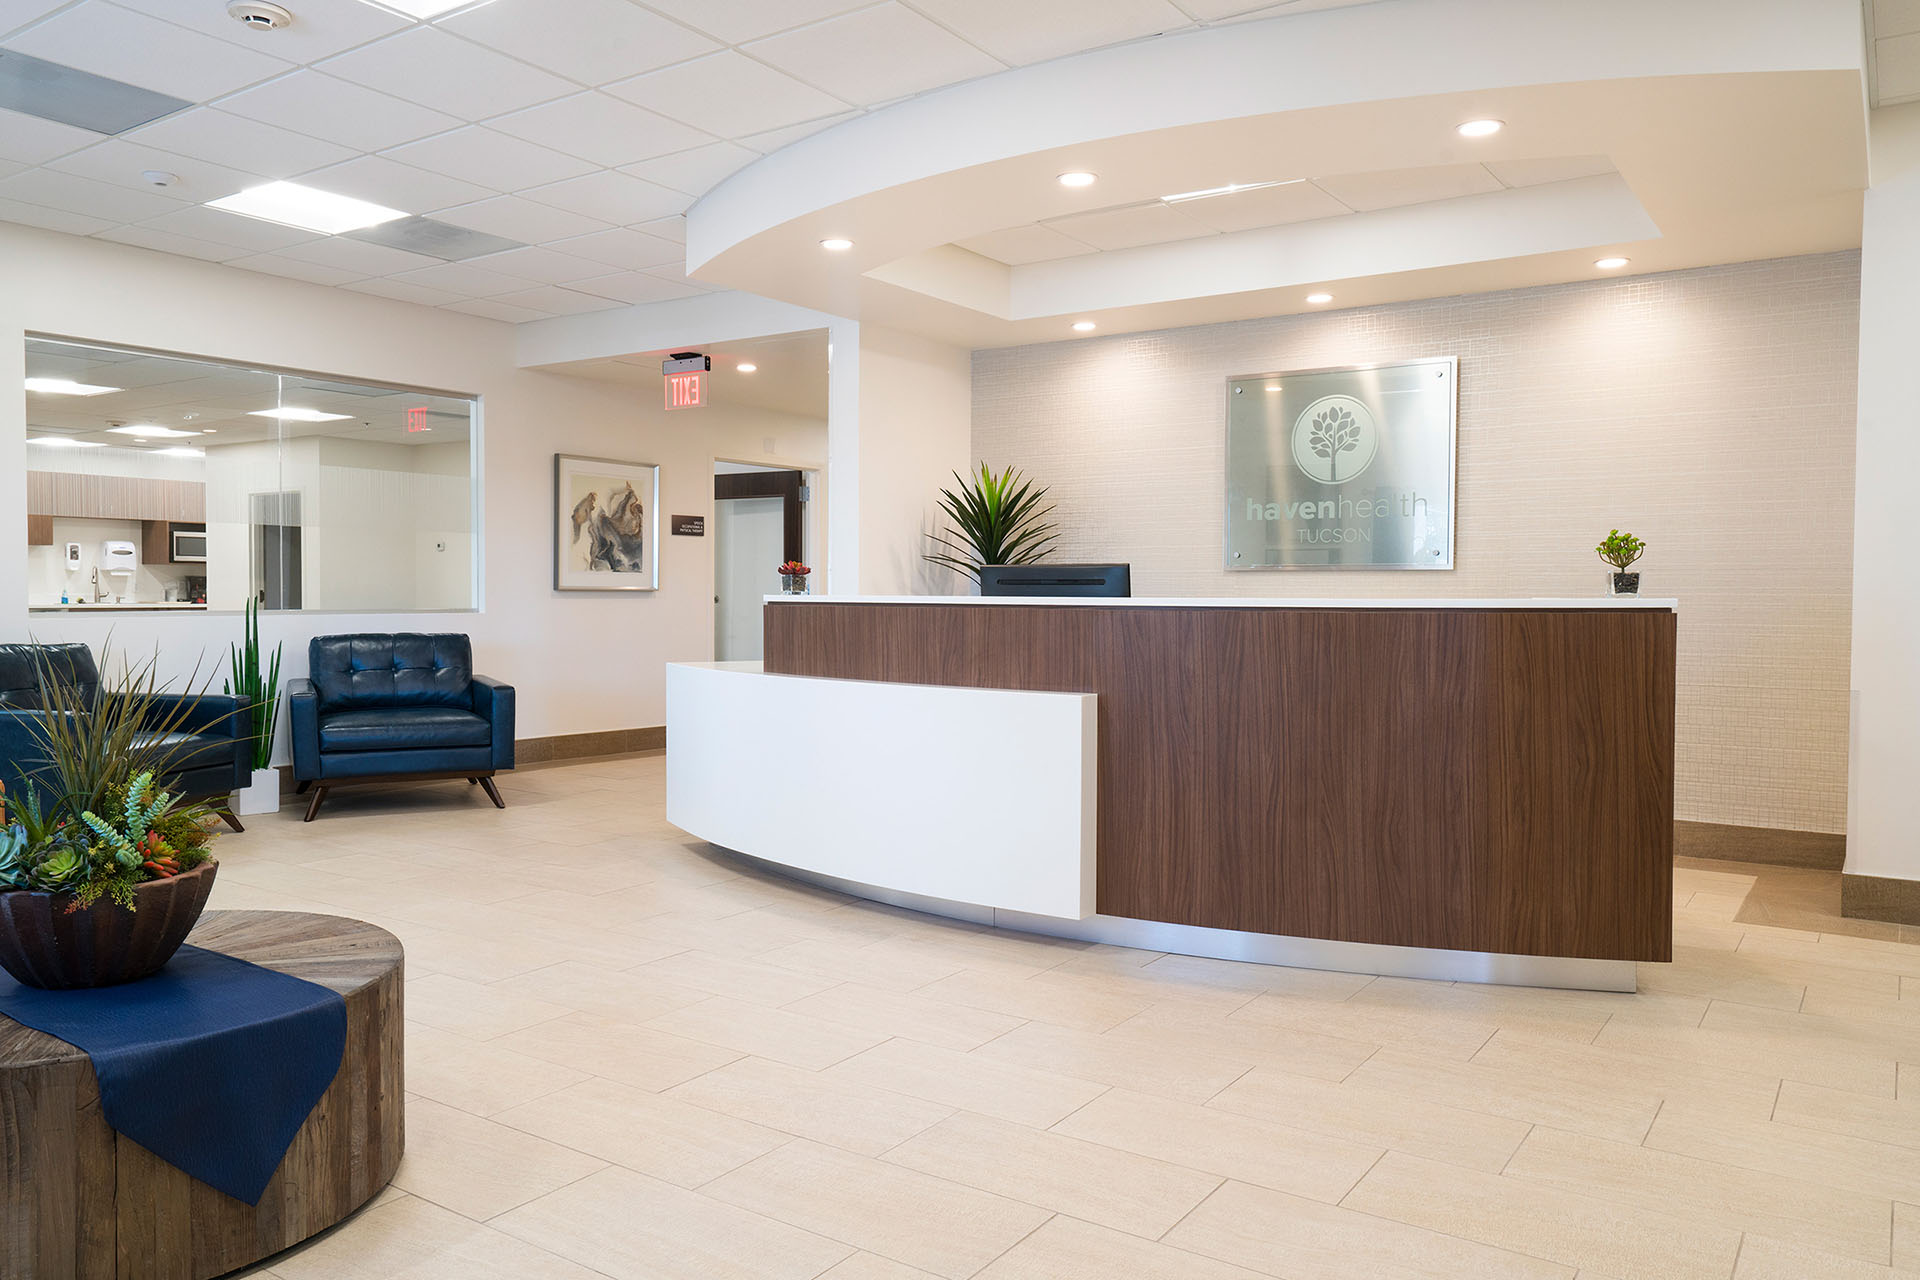 The lobby of Haven Health Tucson